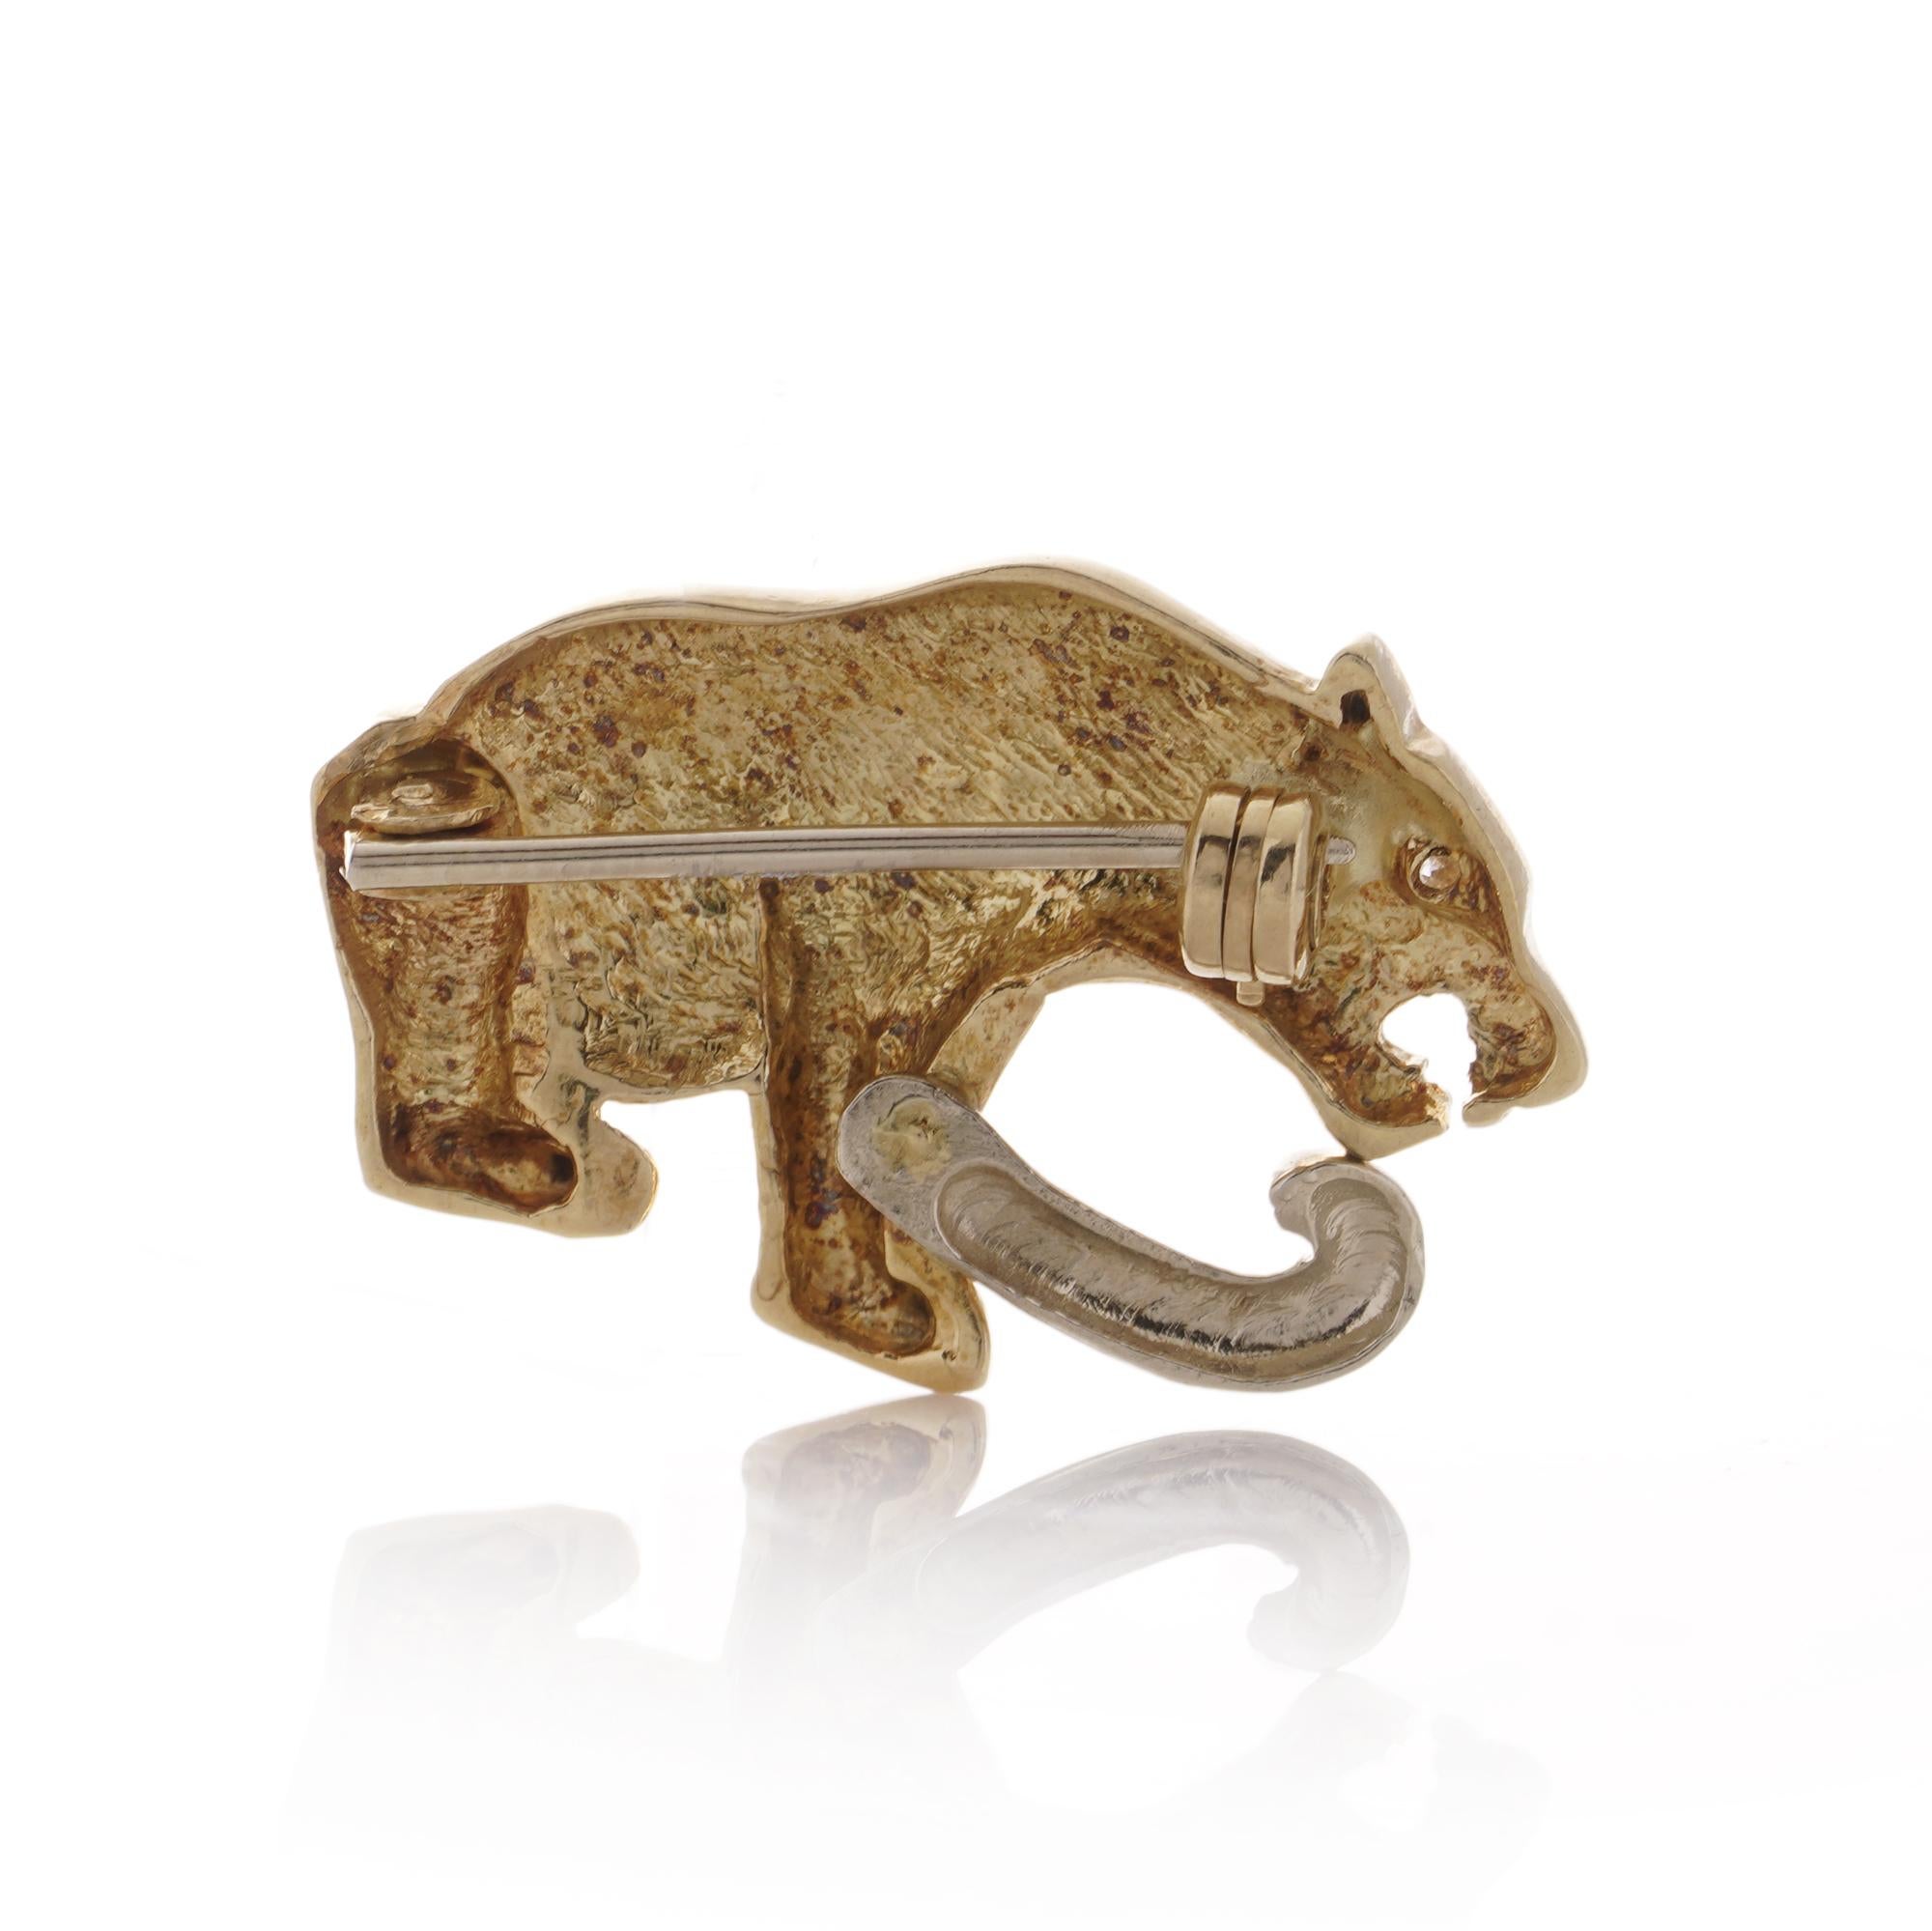 Brilliant Cut 18kt. Yellow Gold Sitting Panther Brooch with Diamond Eye For Sale